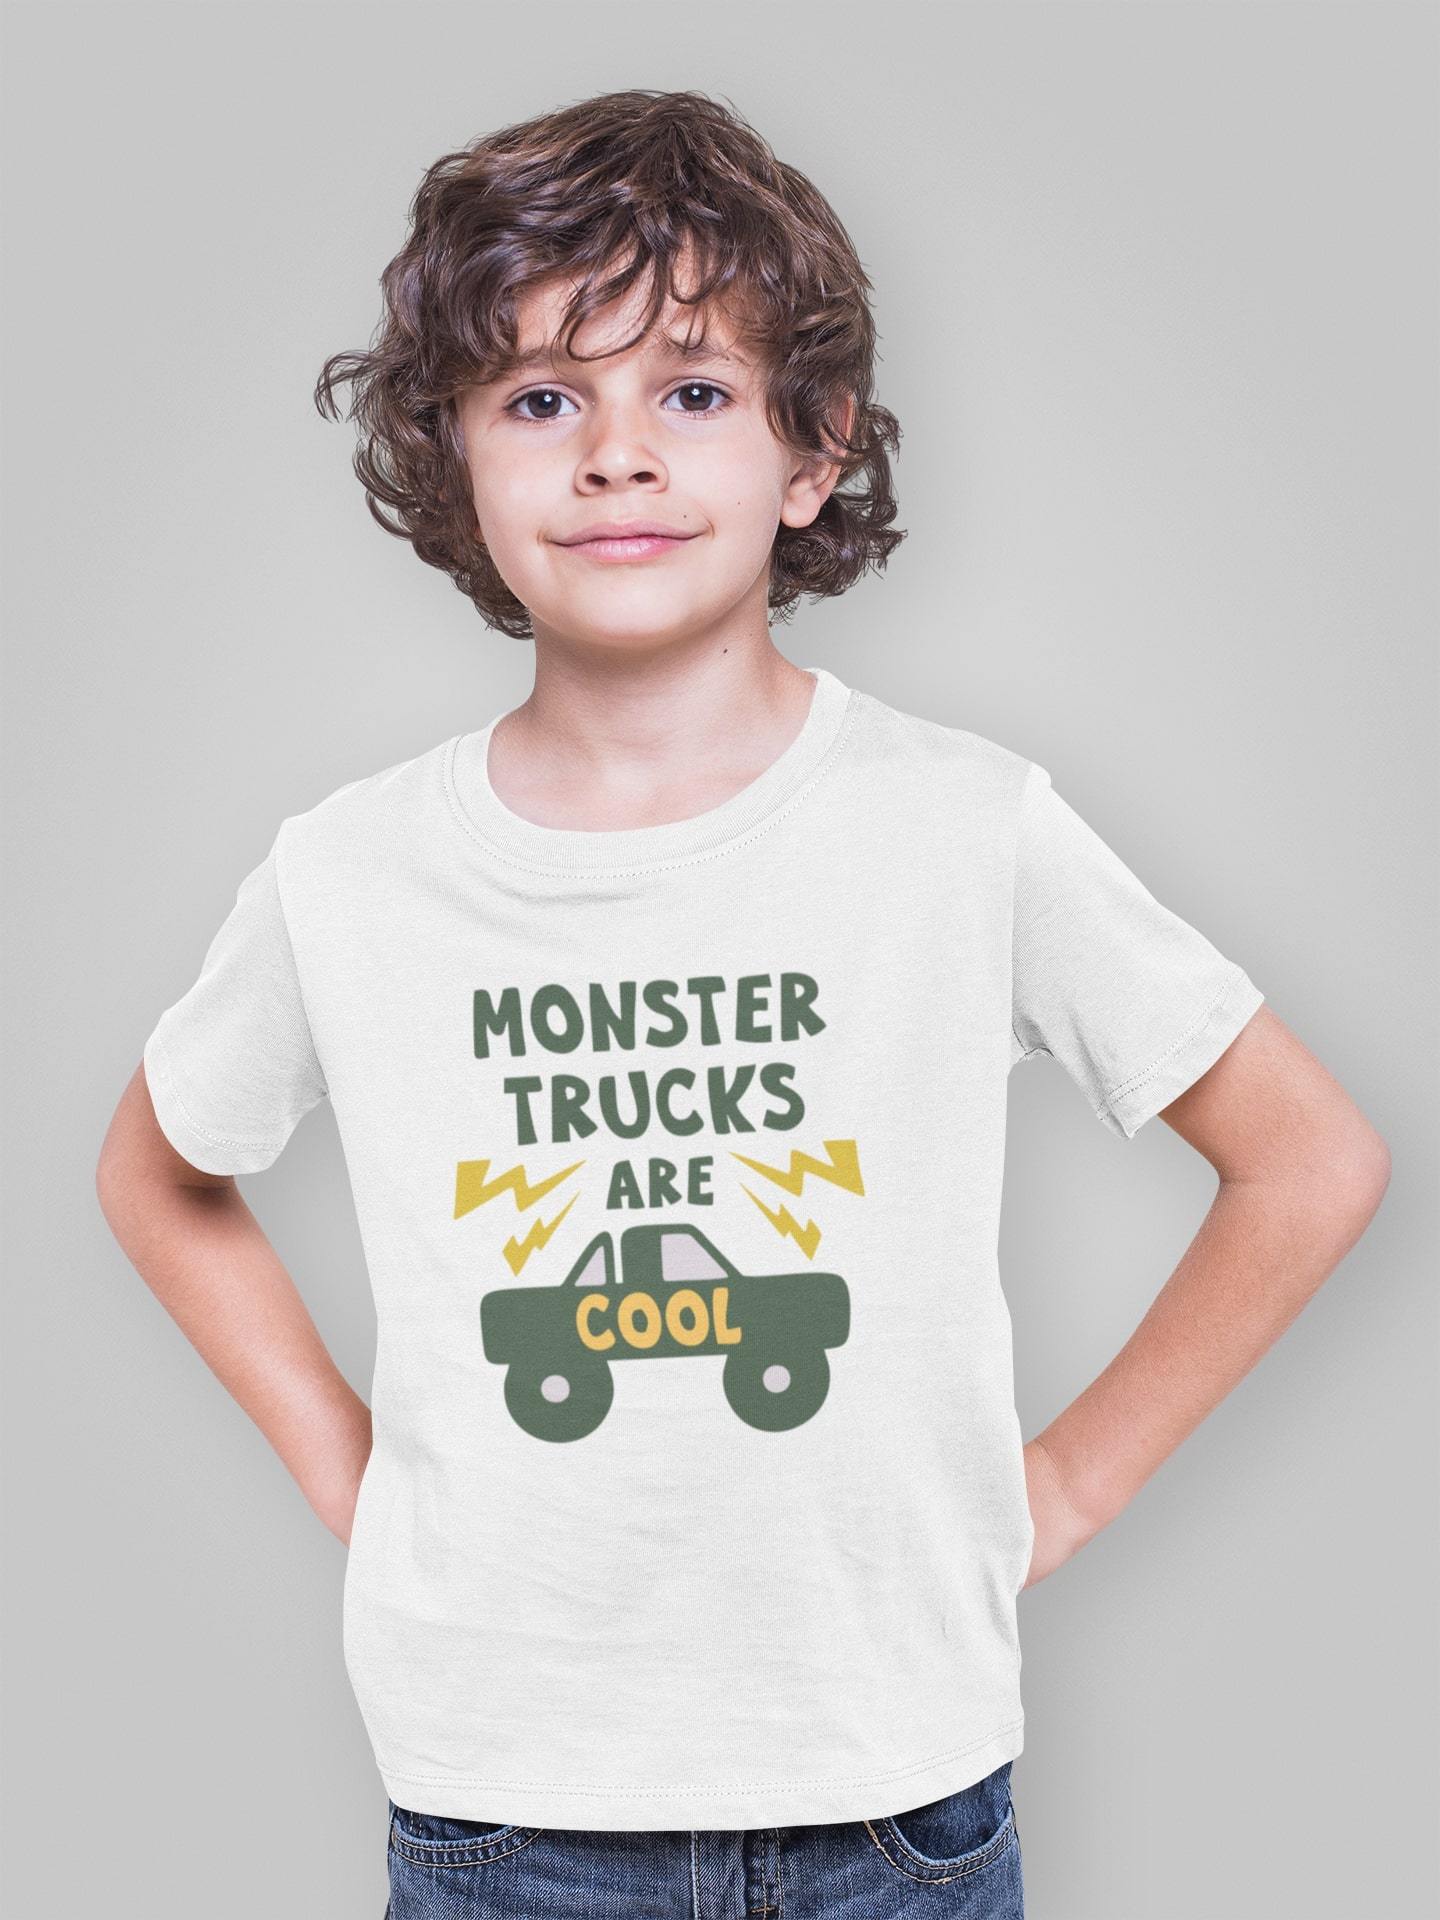 thelegalgang,Monster Trucks are Cool Graphic T-Shirt for Kids,KIDS.